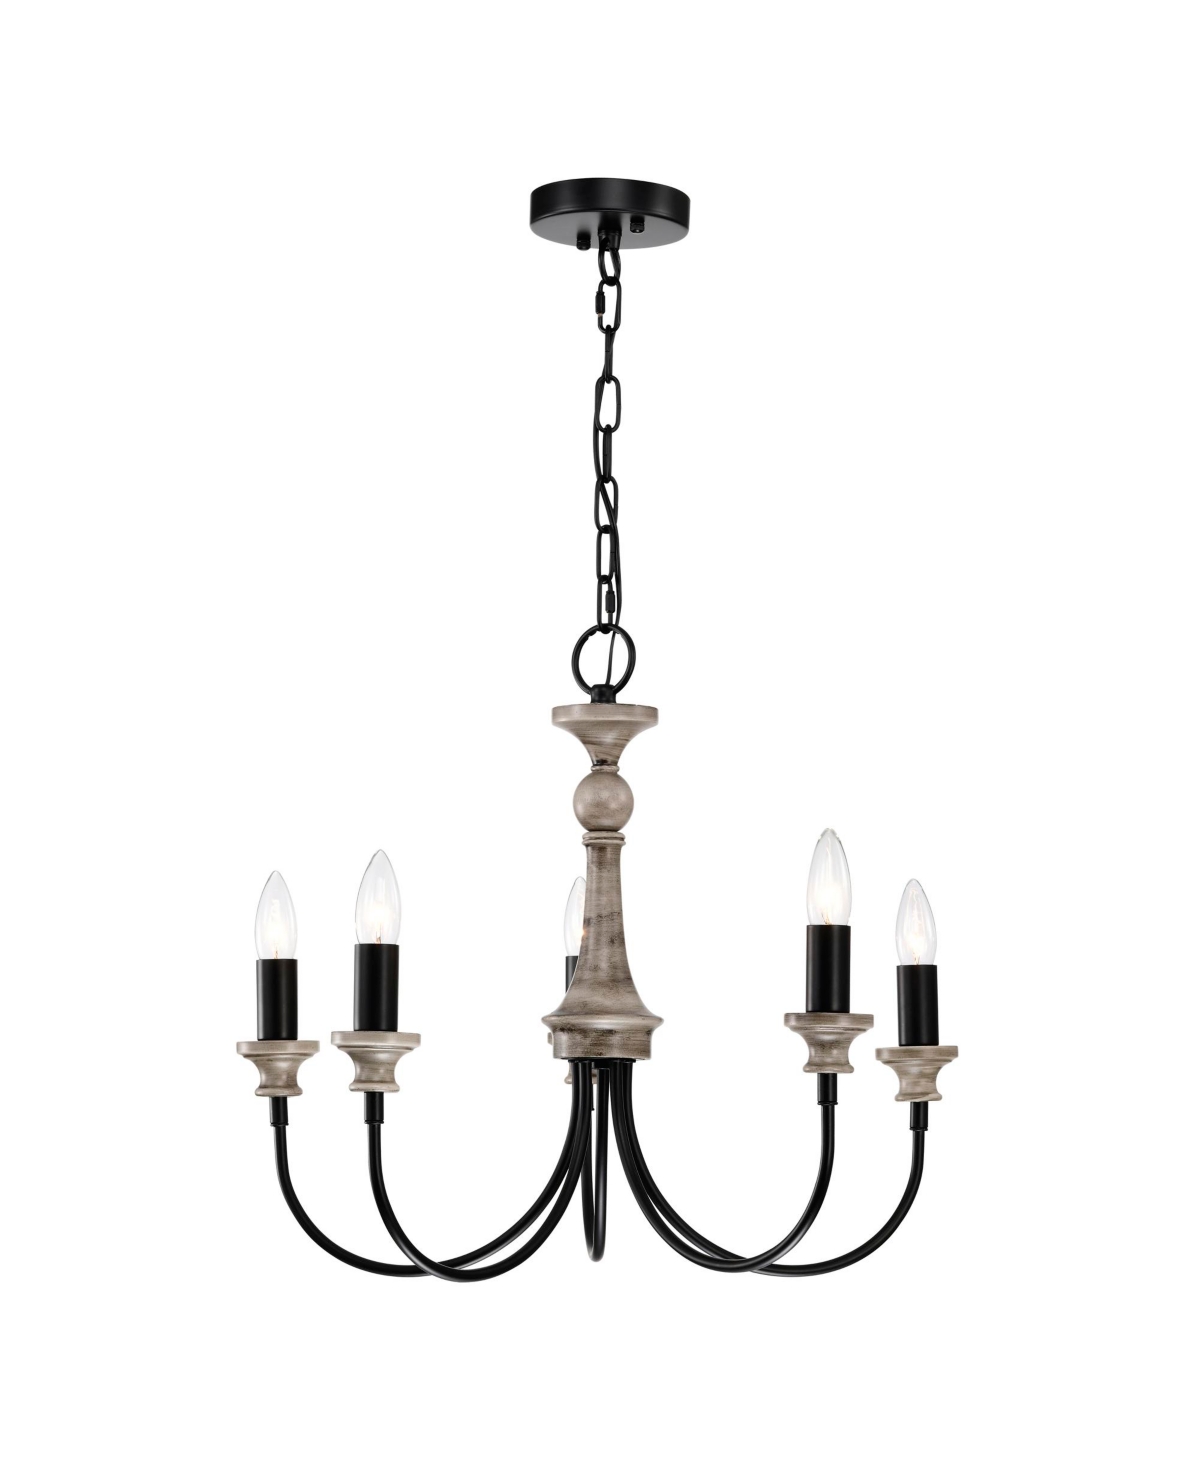 Home Accessories Yura 22" 5-light Indoor Finish Chandelier With Light Kit In Matte Black And Faux Wood Grain